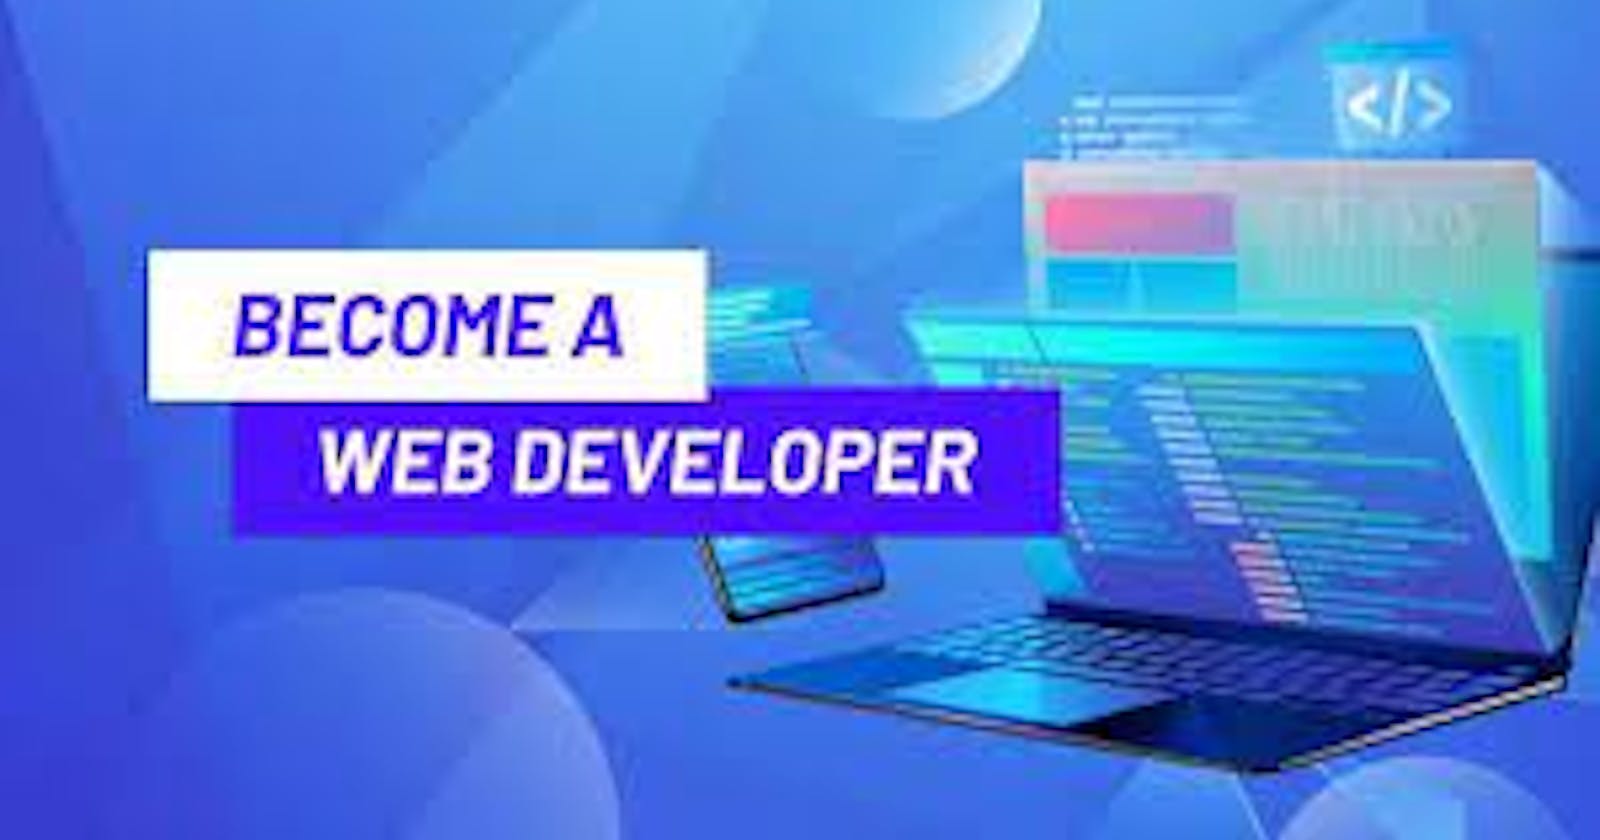 How To Become a Web Developer In 2023